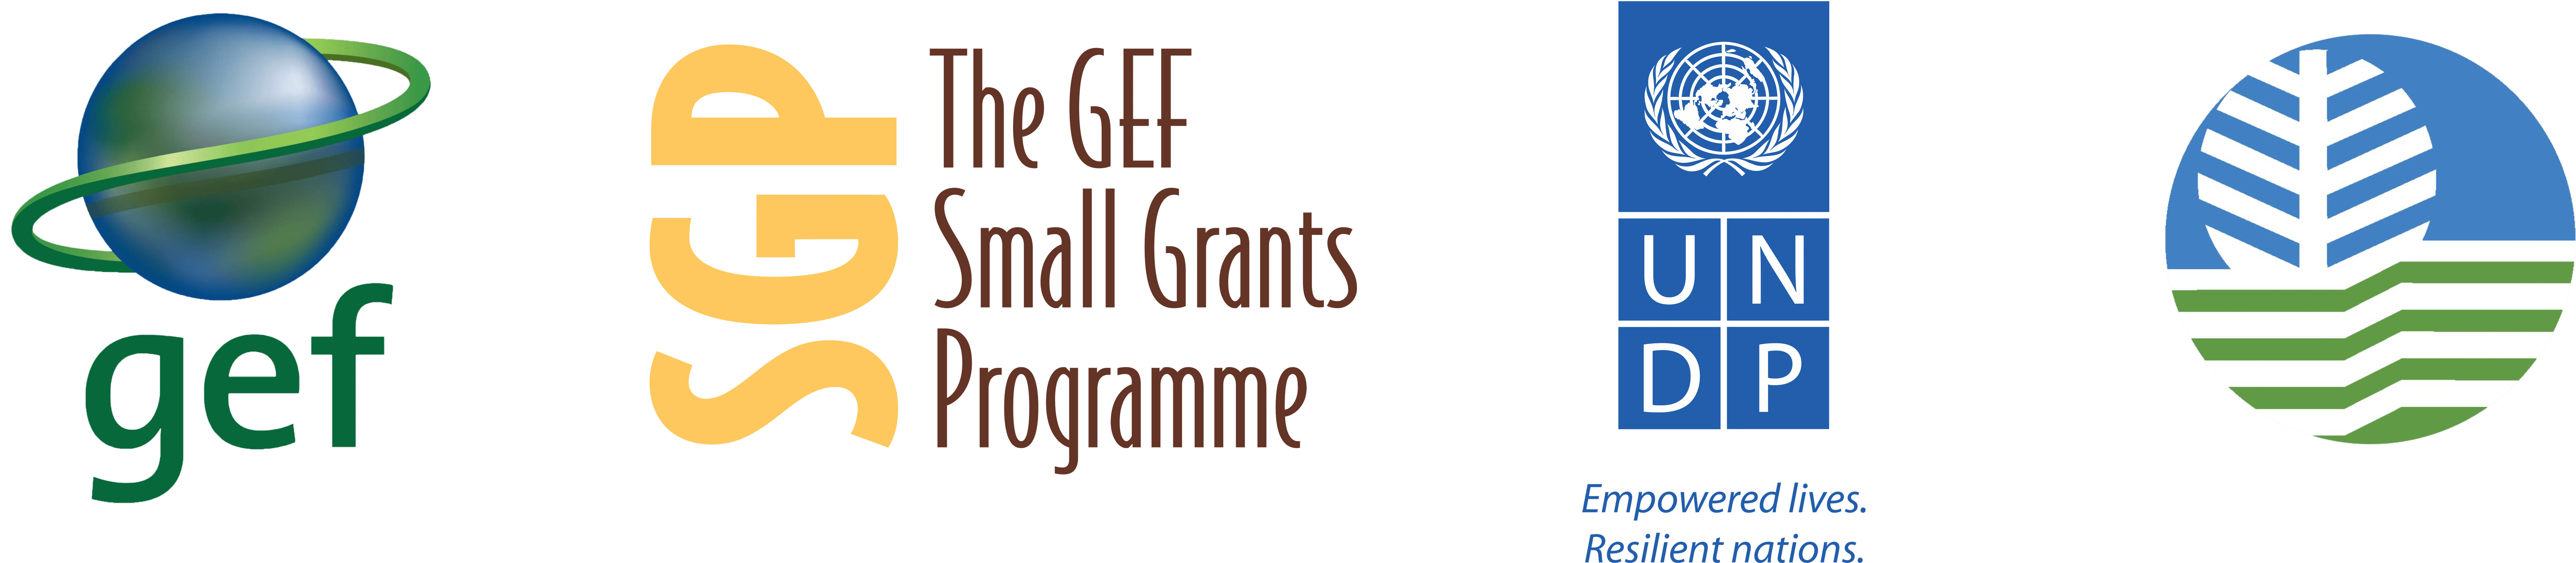 Gef Logo - Resources-logos - The GEF Small Grants Programme